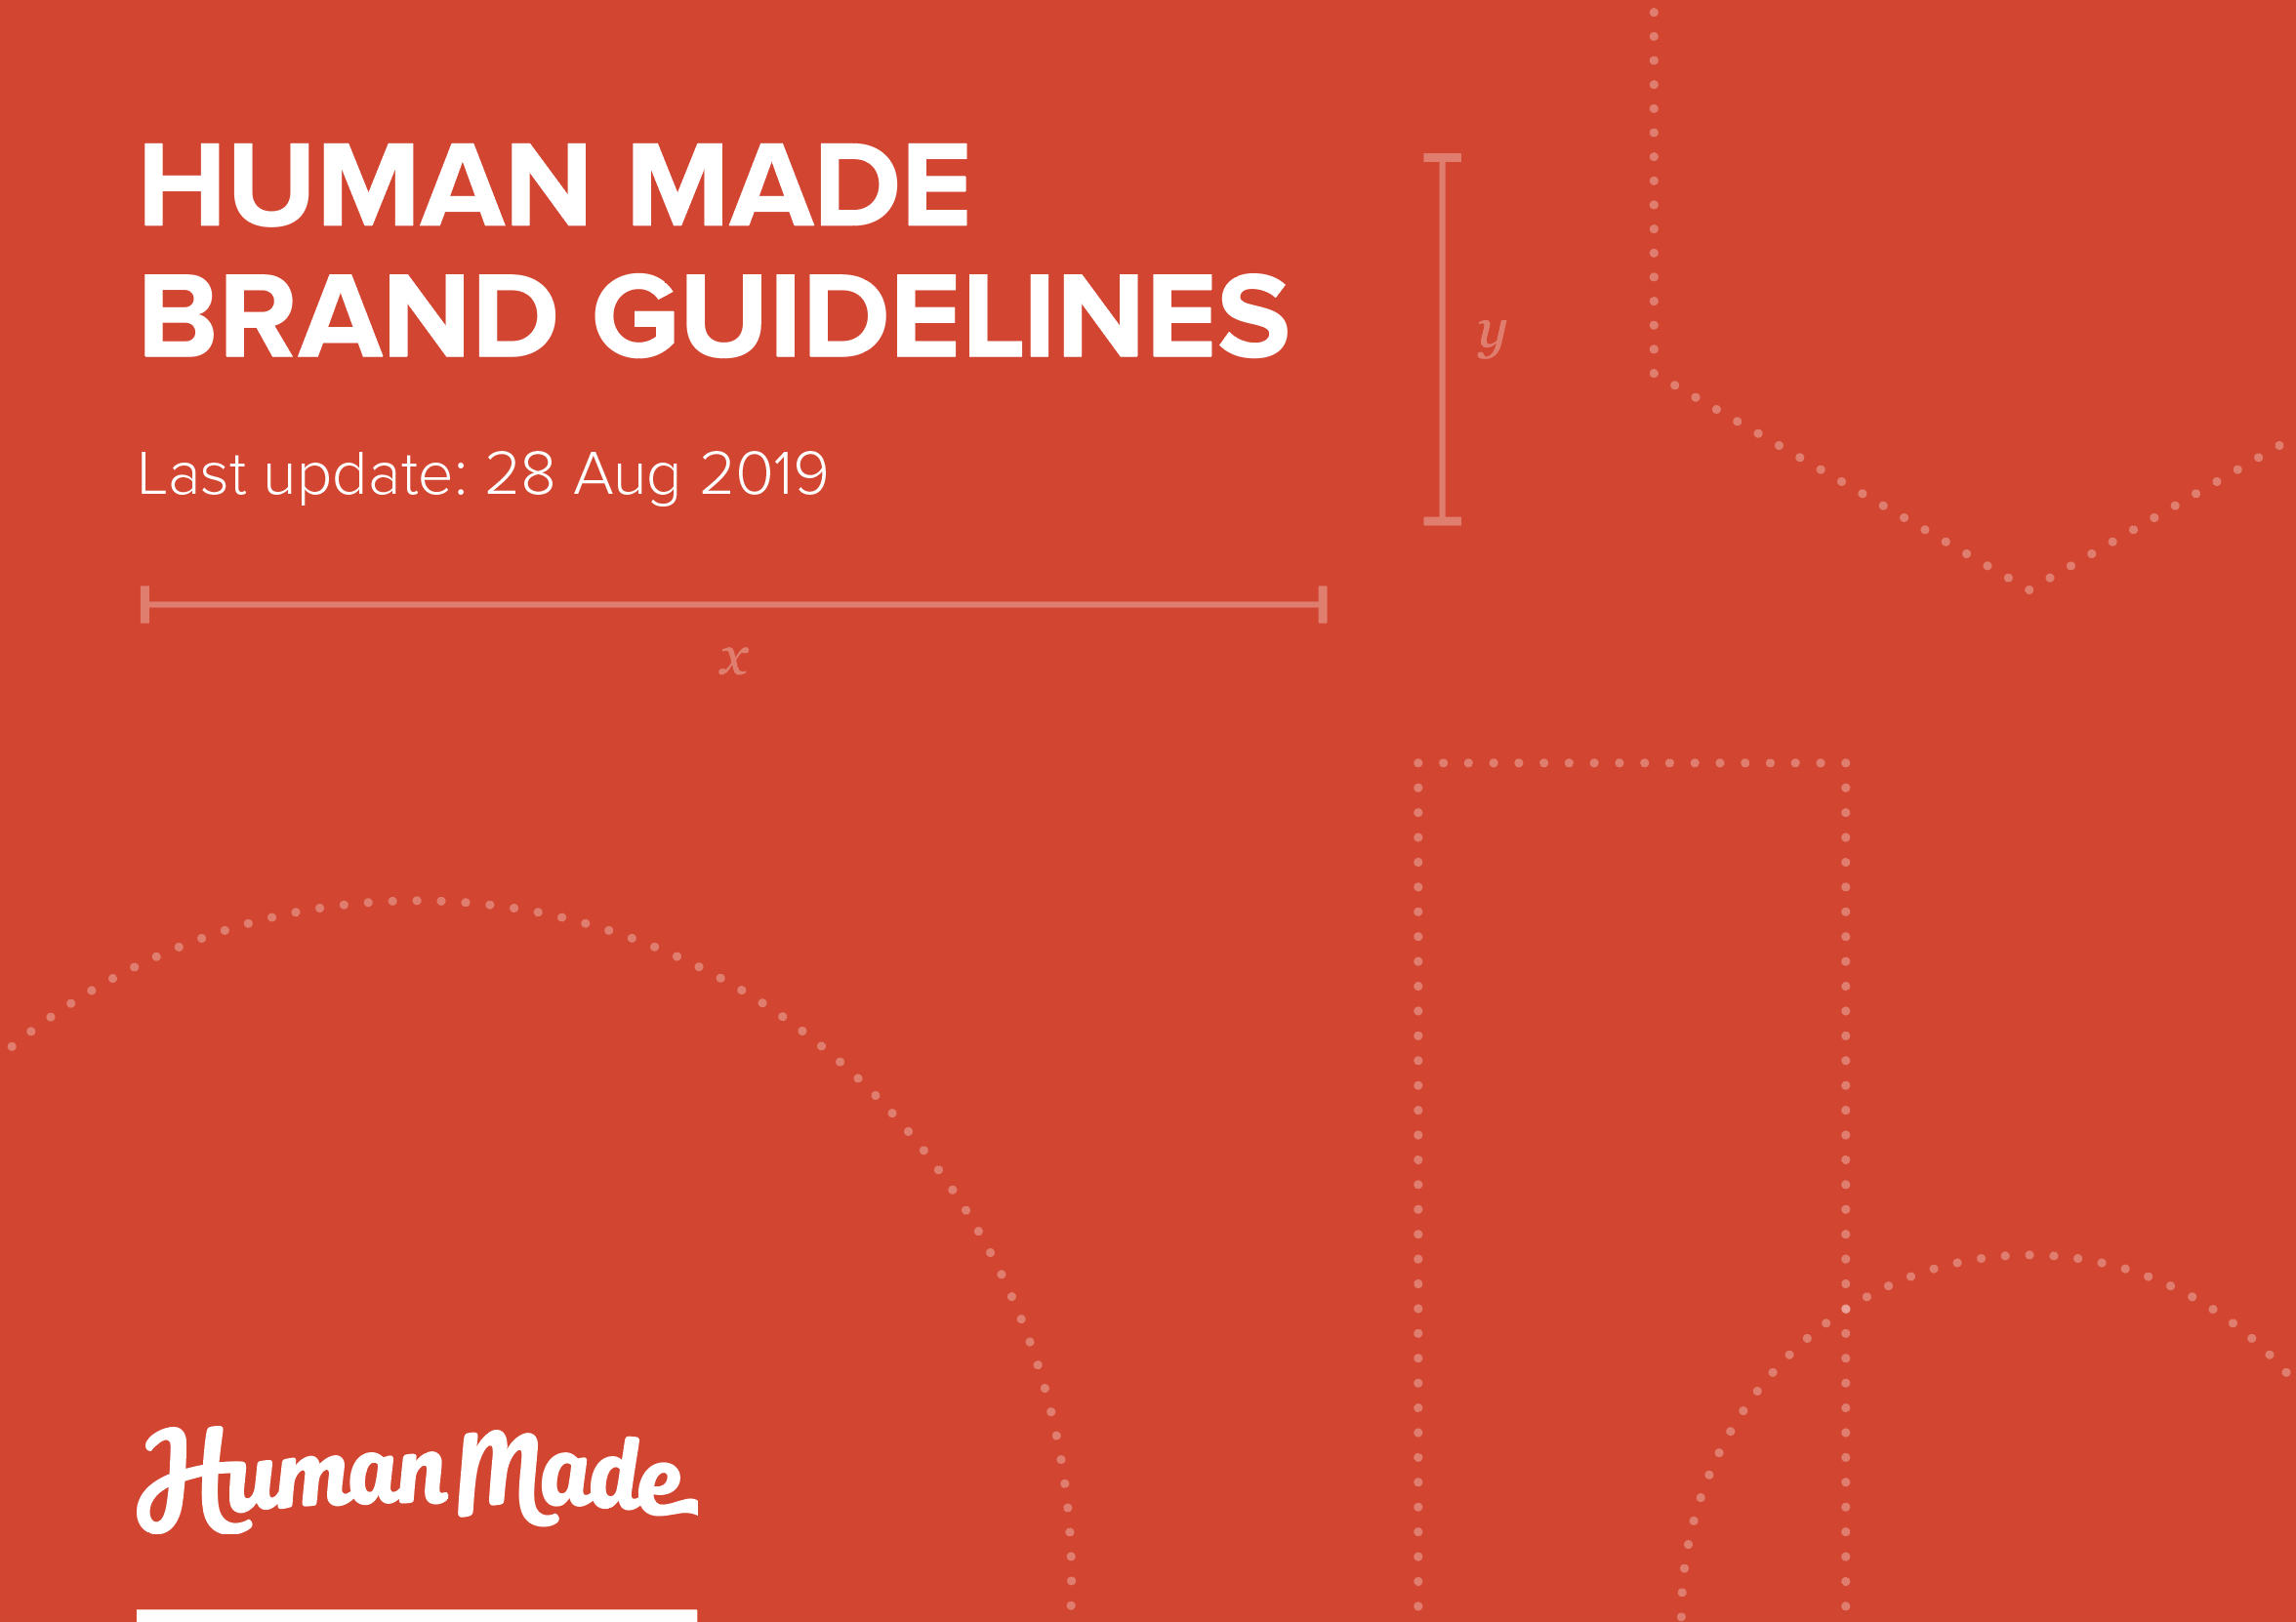 Human Made Brand Guidelines cover